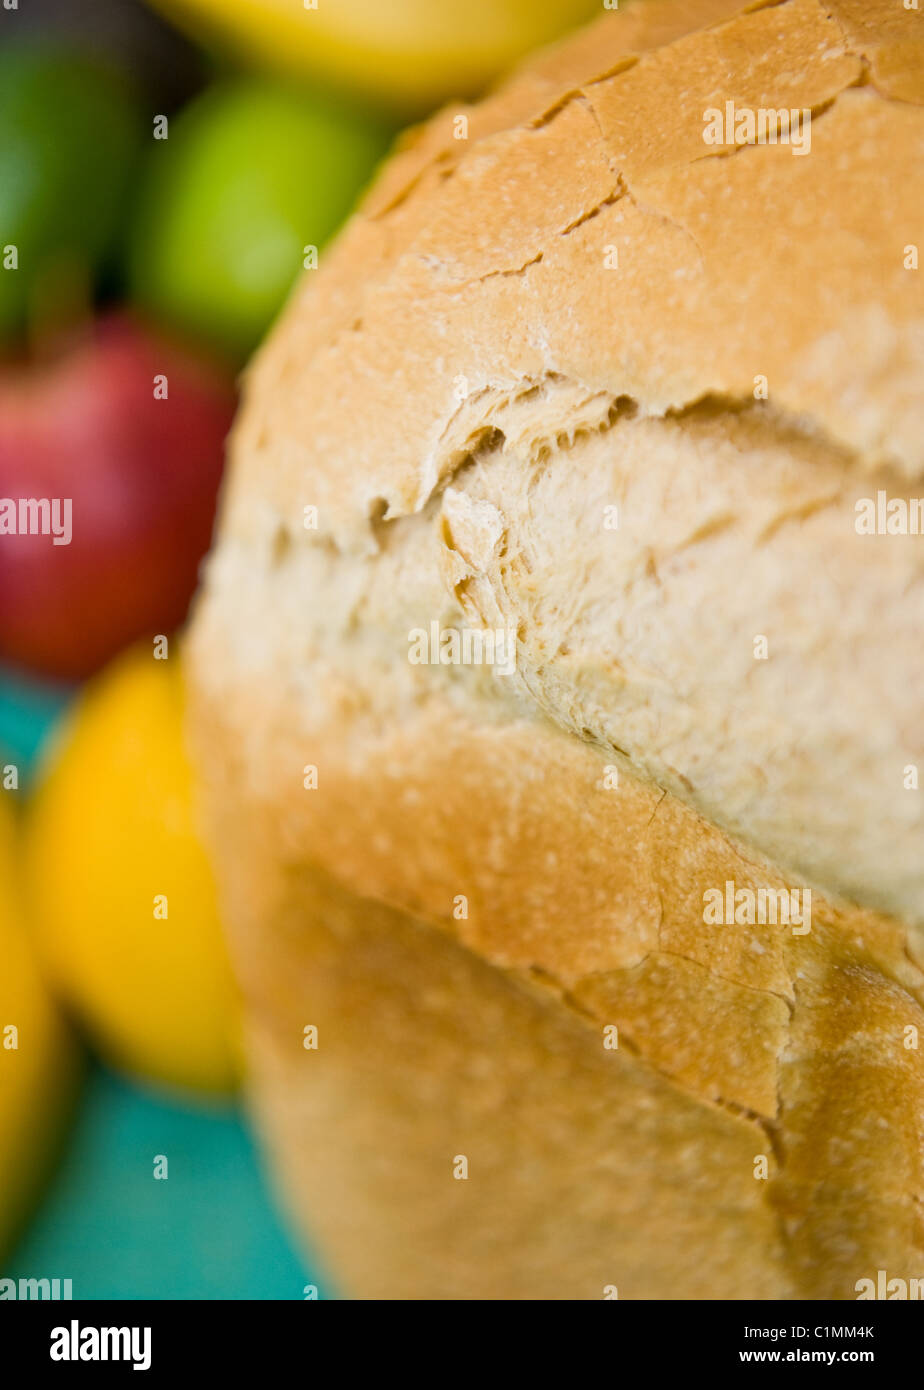 A fresh baked loaf of organic homemade French bread, made in a bread machine Stock Photo